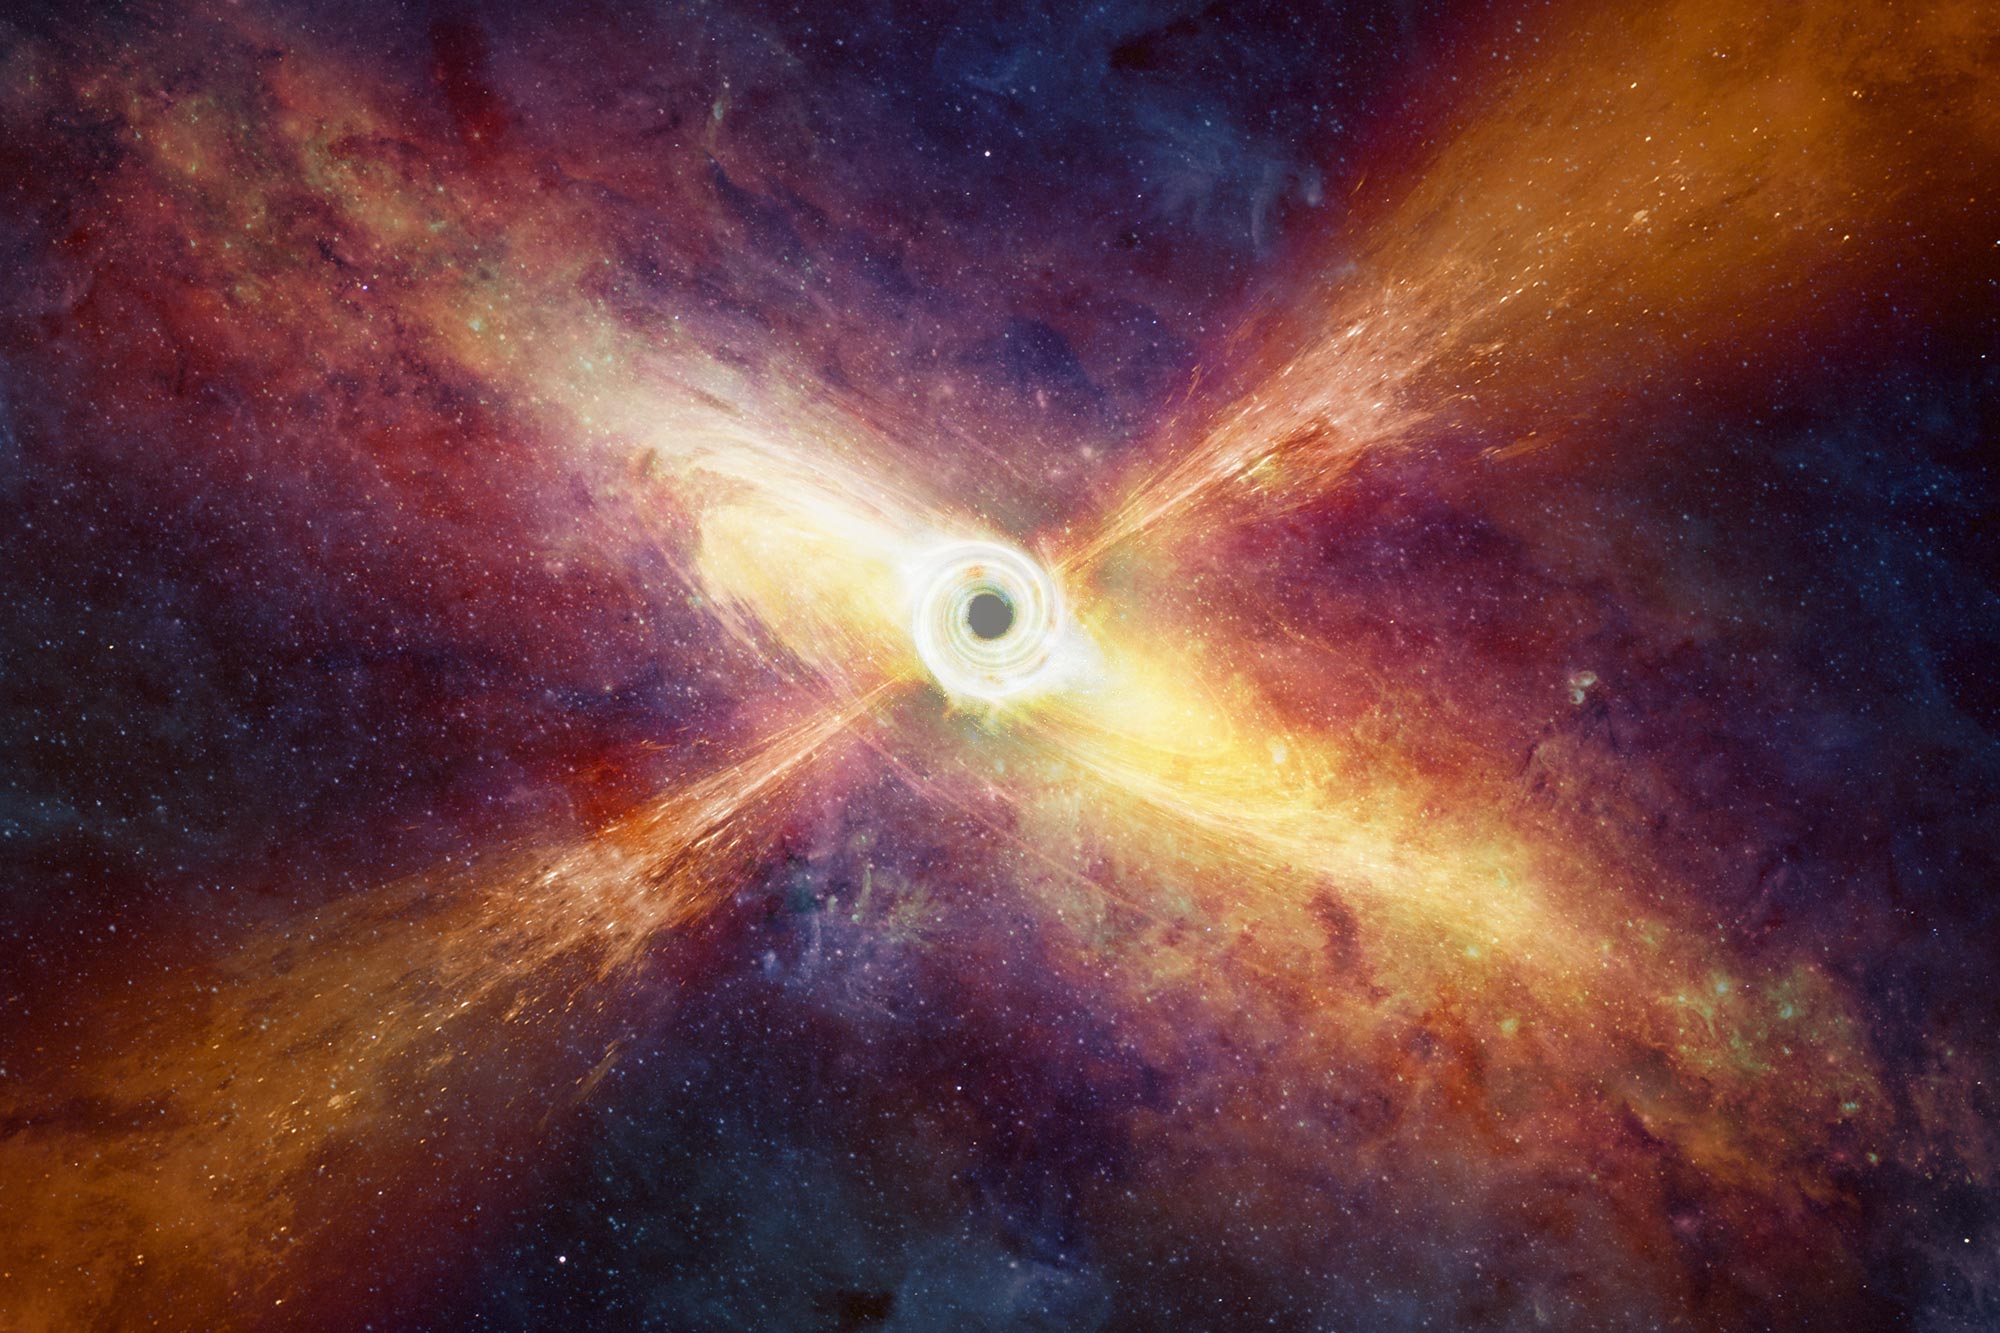 The Most Powerful Black Hole Eruption Ever Seen in the Universe